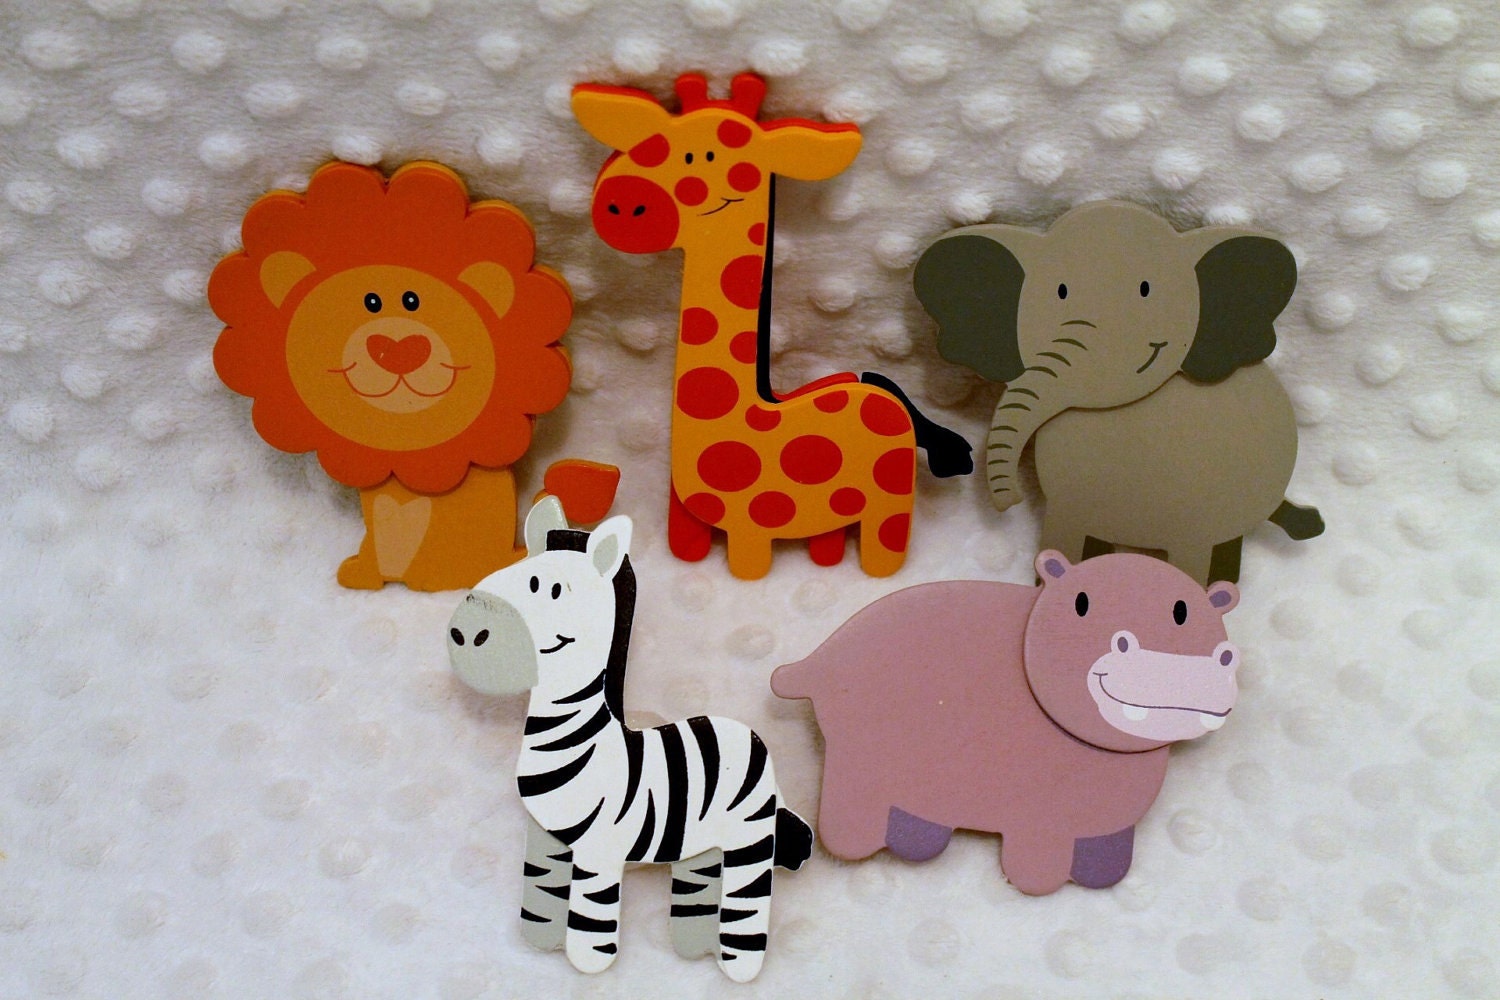 Popular items for Kids room decoration on Etsy